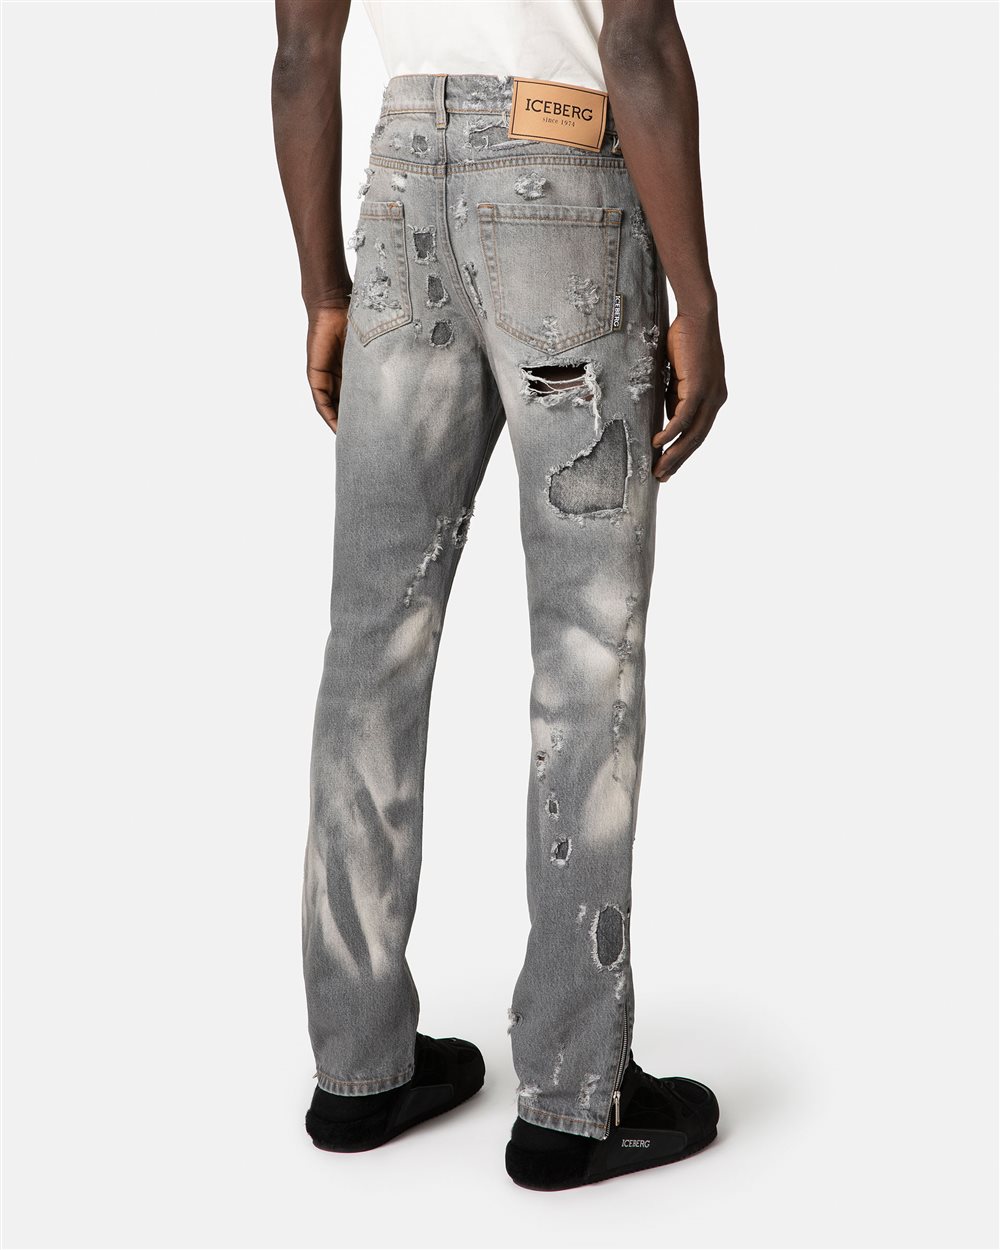 Gray washed jeans 5 pockets - Iceberg - Official Website